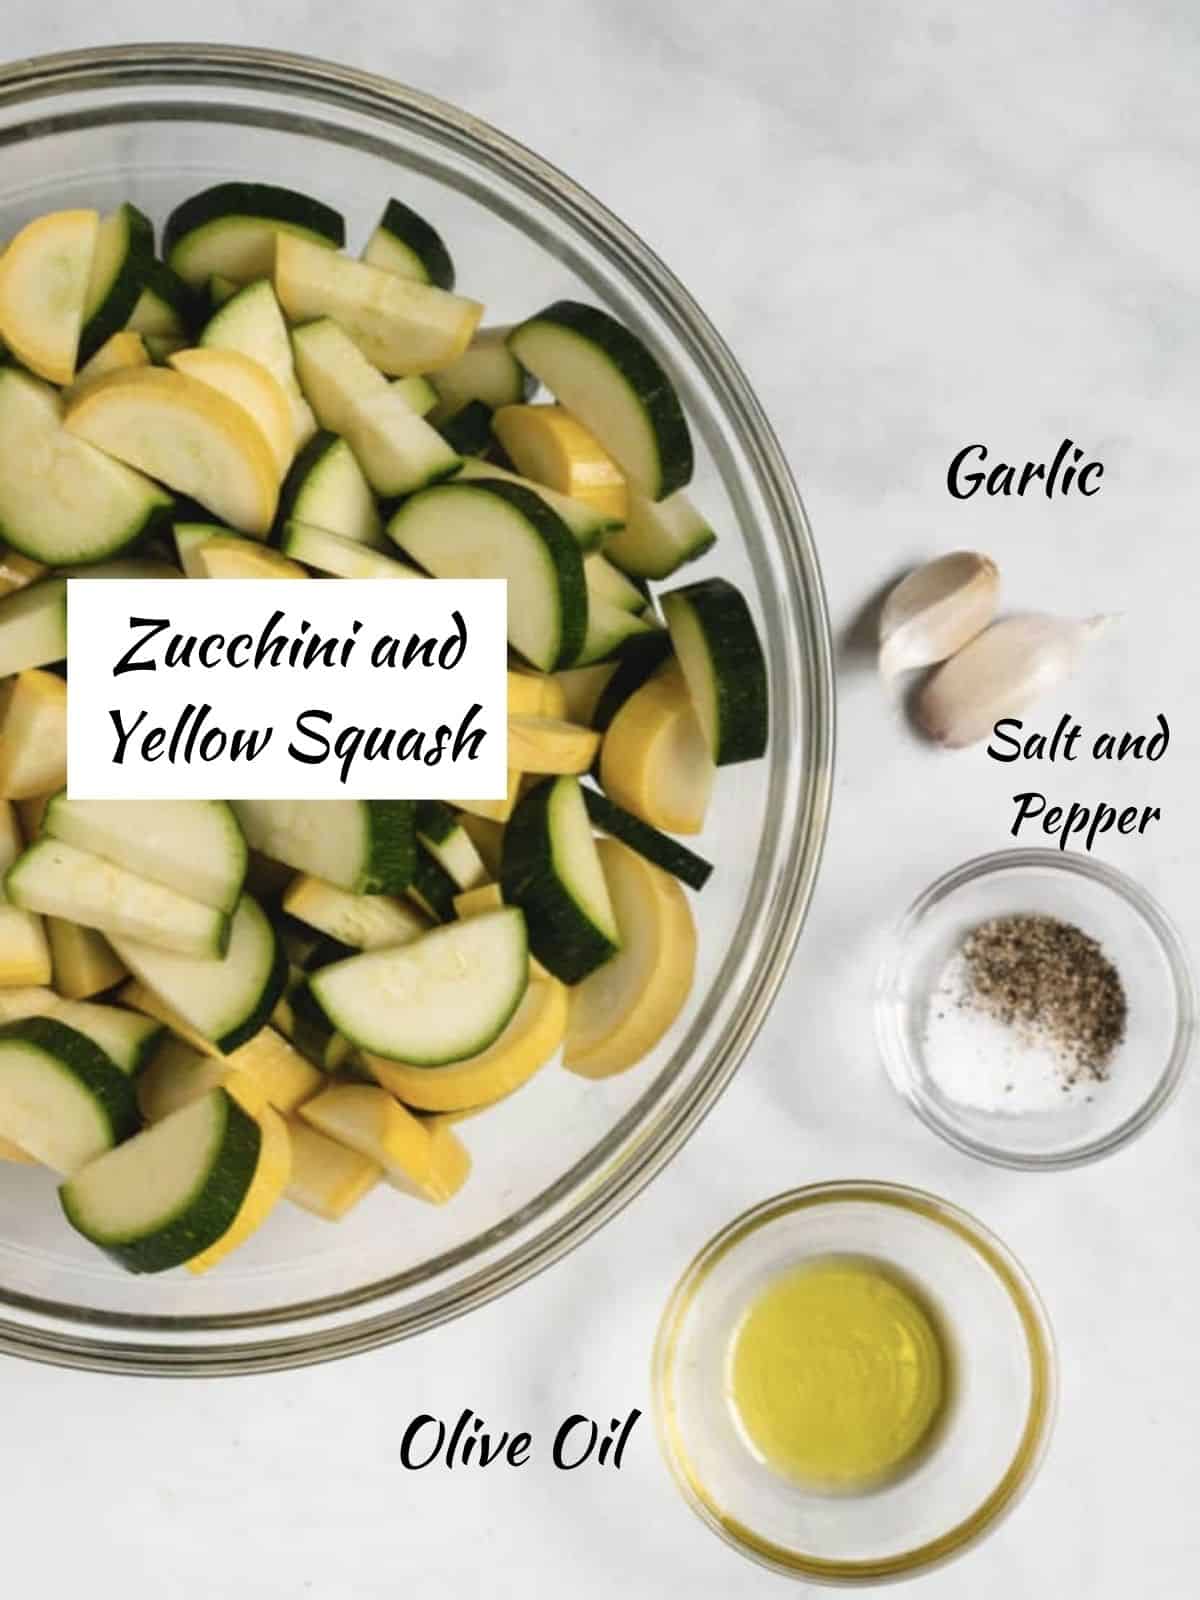 Air Fryer Squash Ingredients: Sliced zucchini and yellow squash, 2 cloves of garlic, salt and pepper, olive oil. 